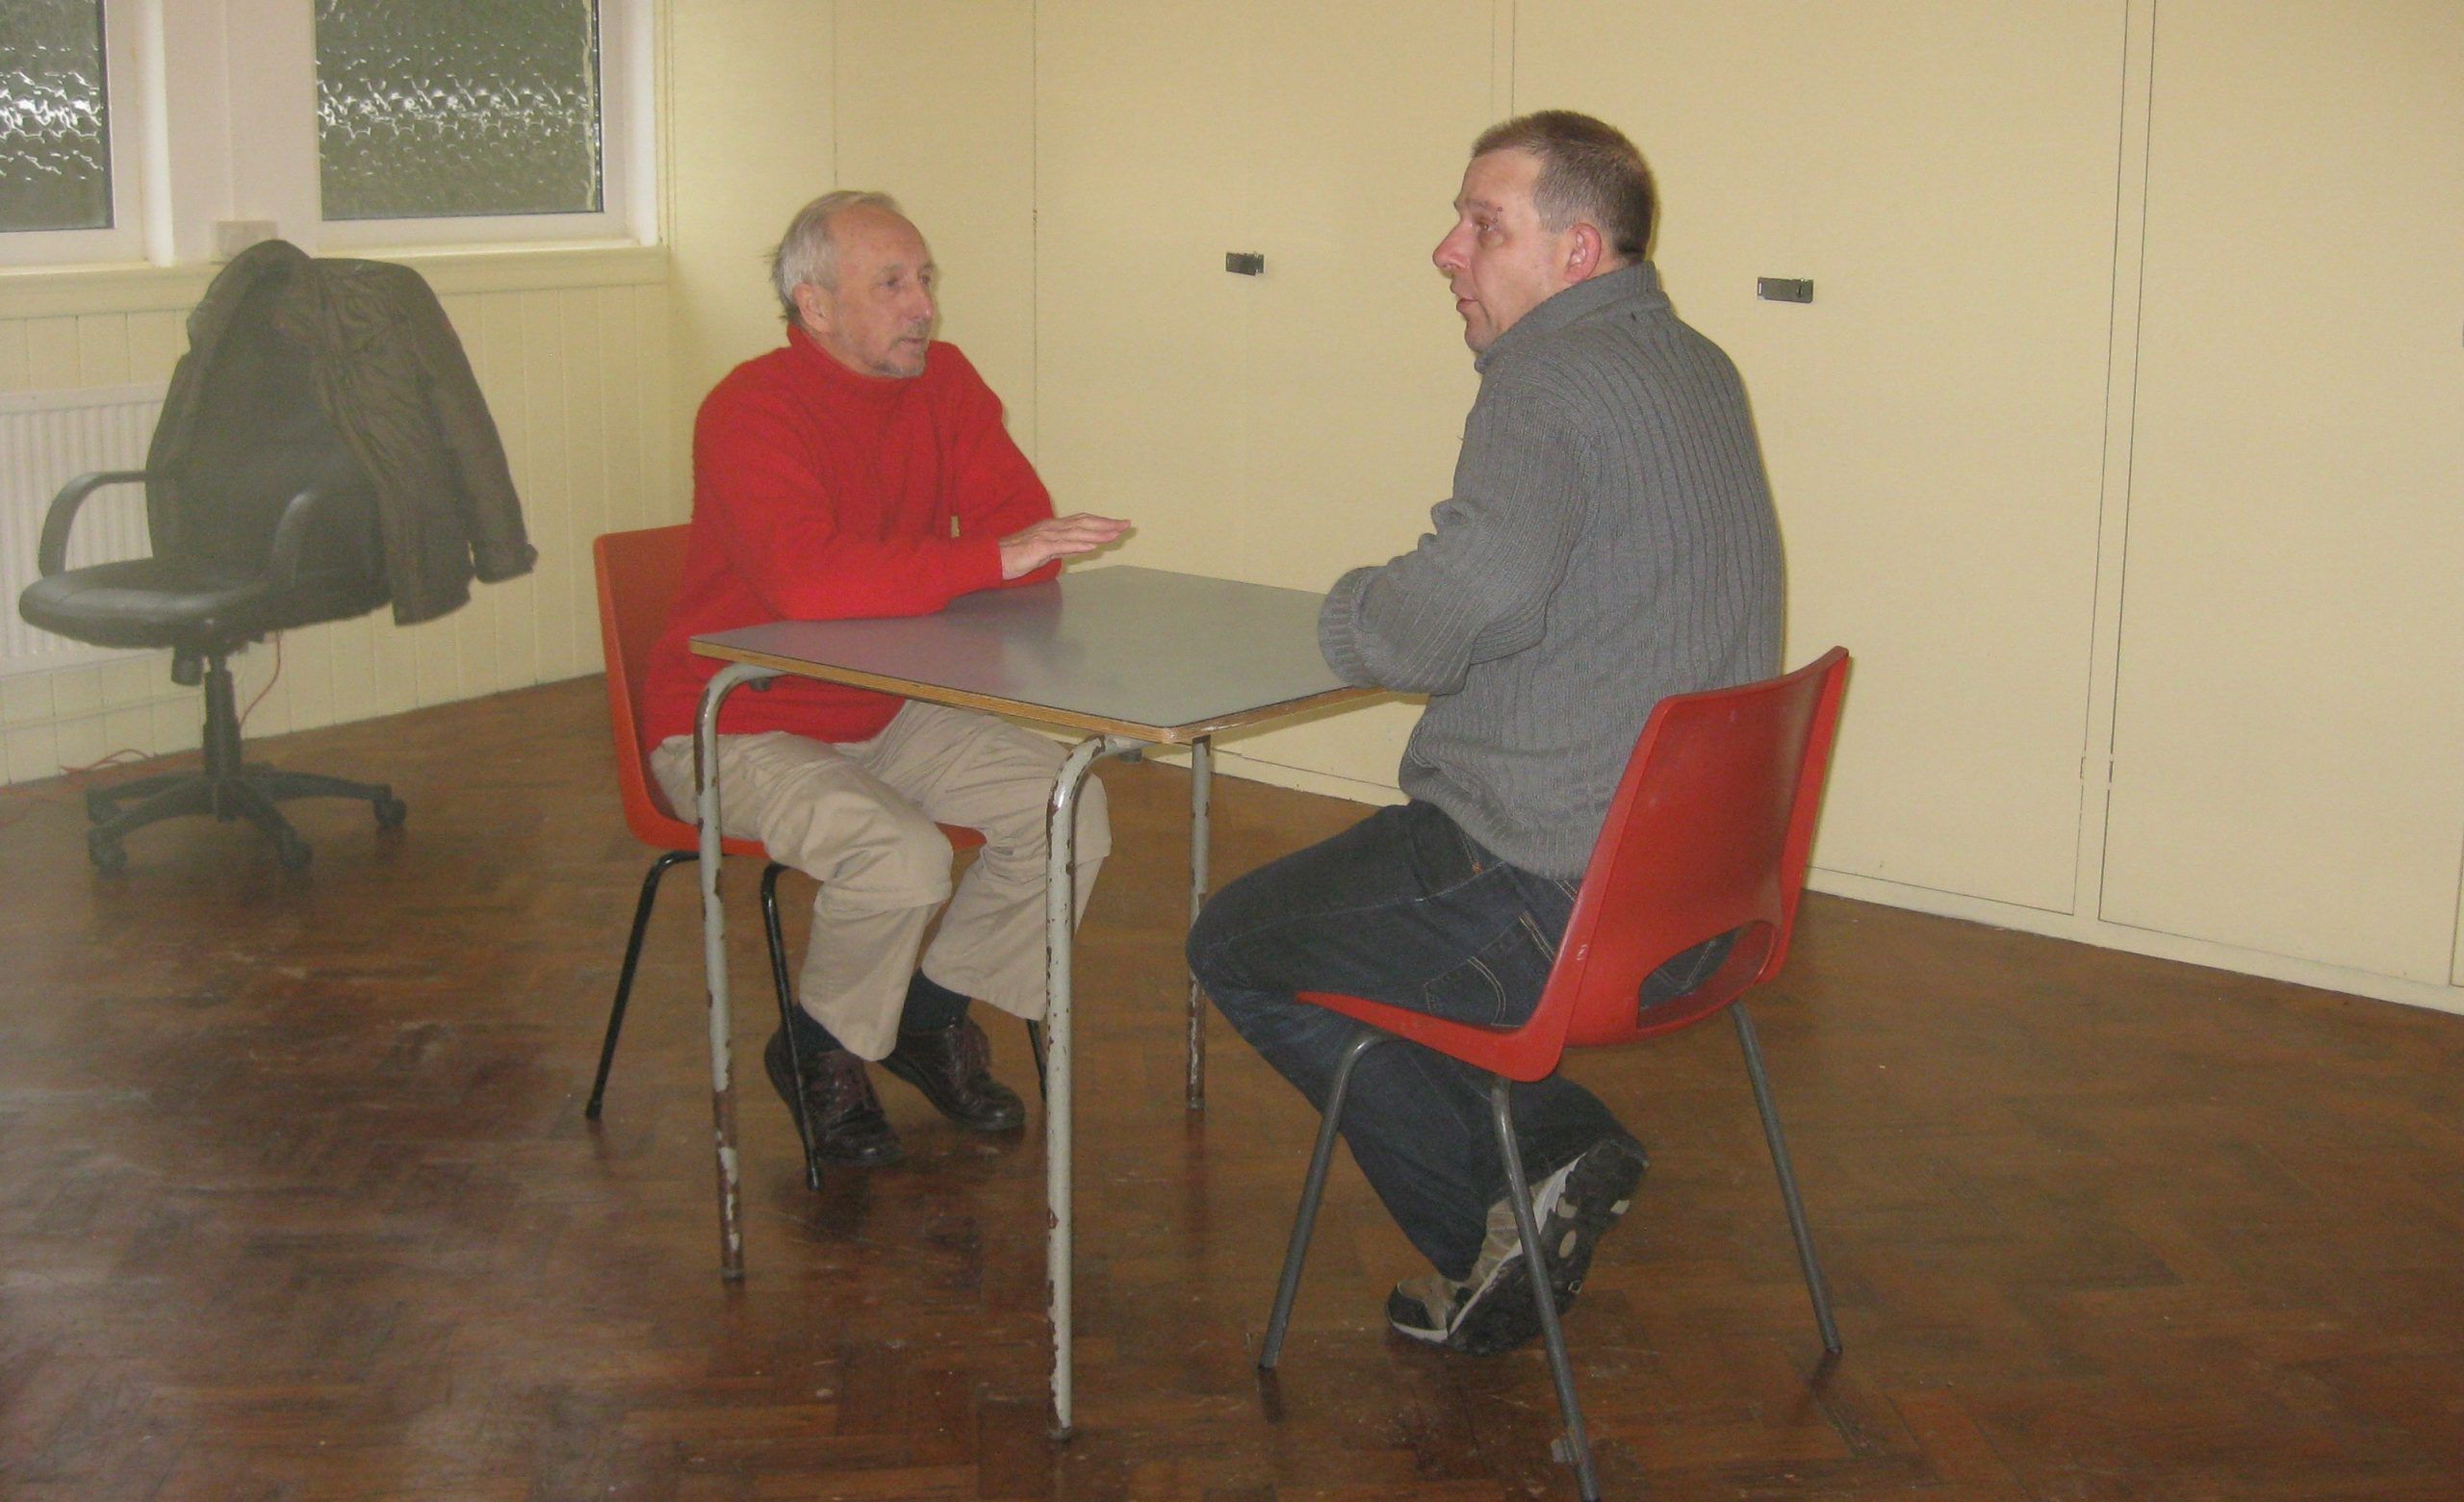 Mentoring and Advice at the Community Centre